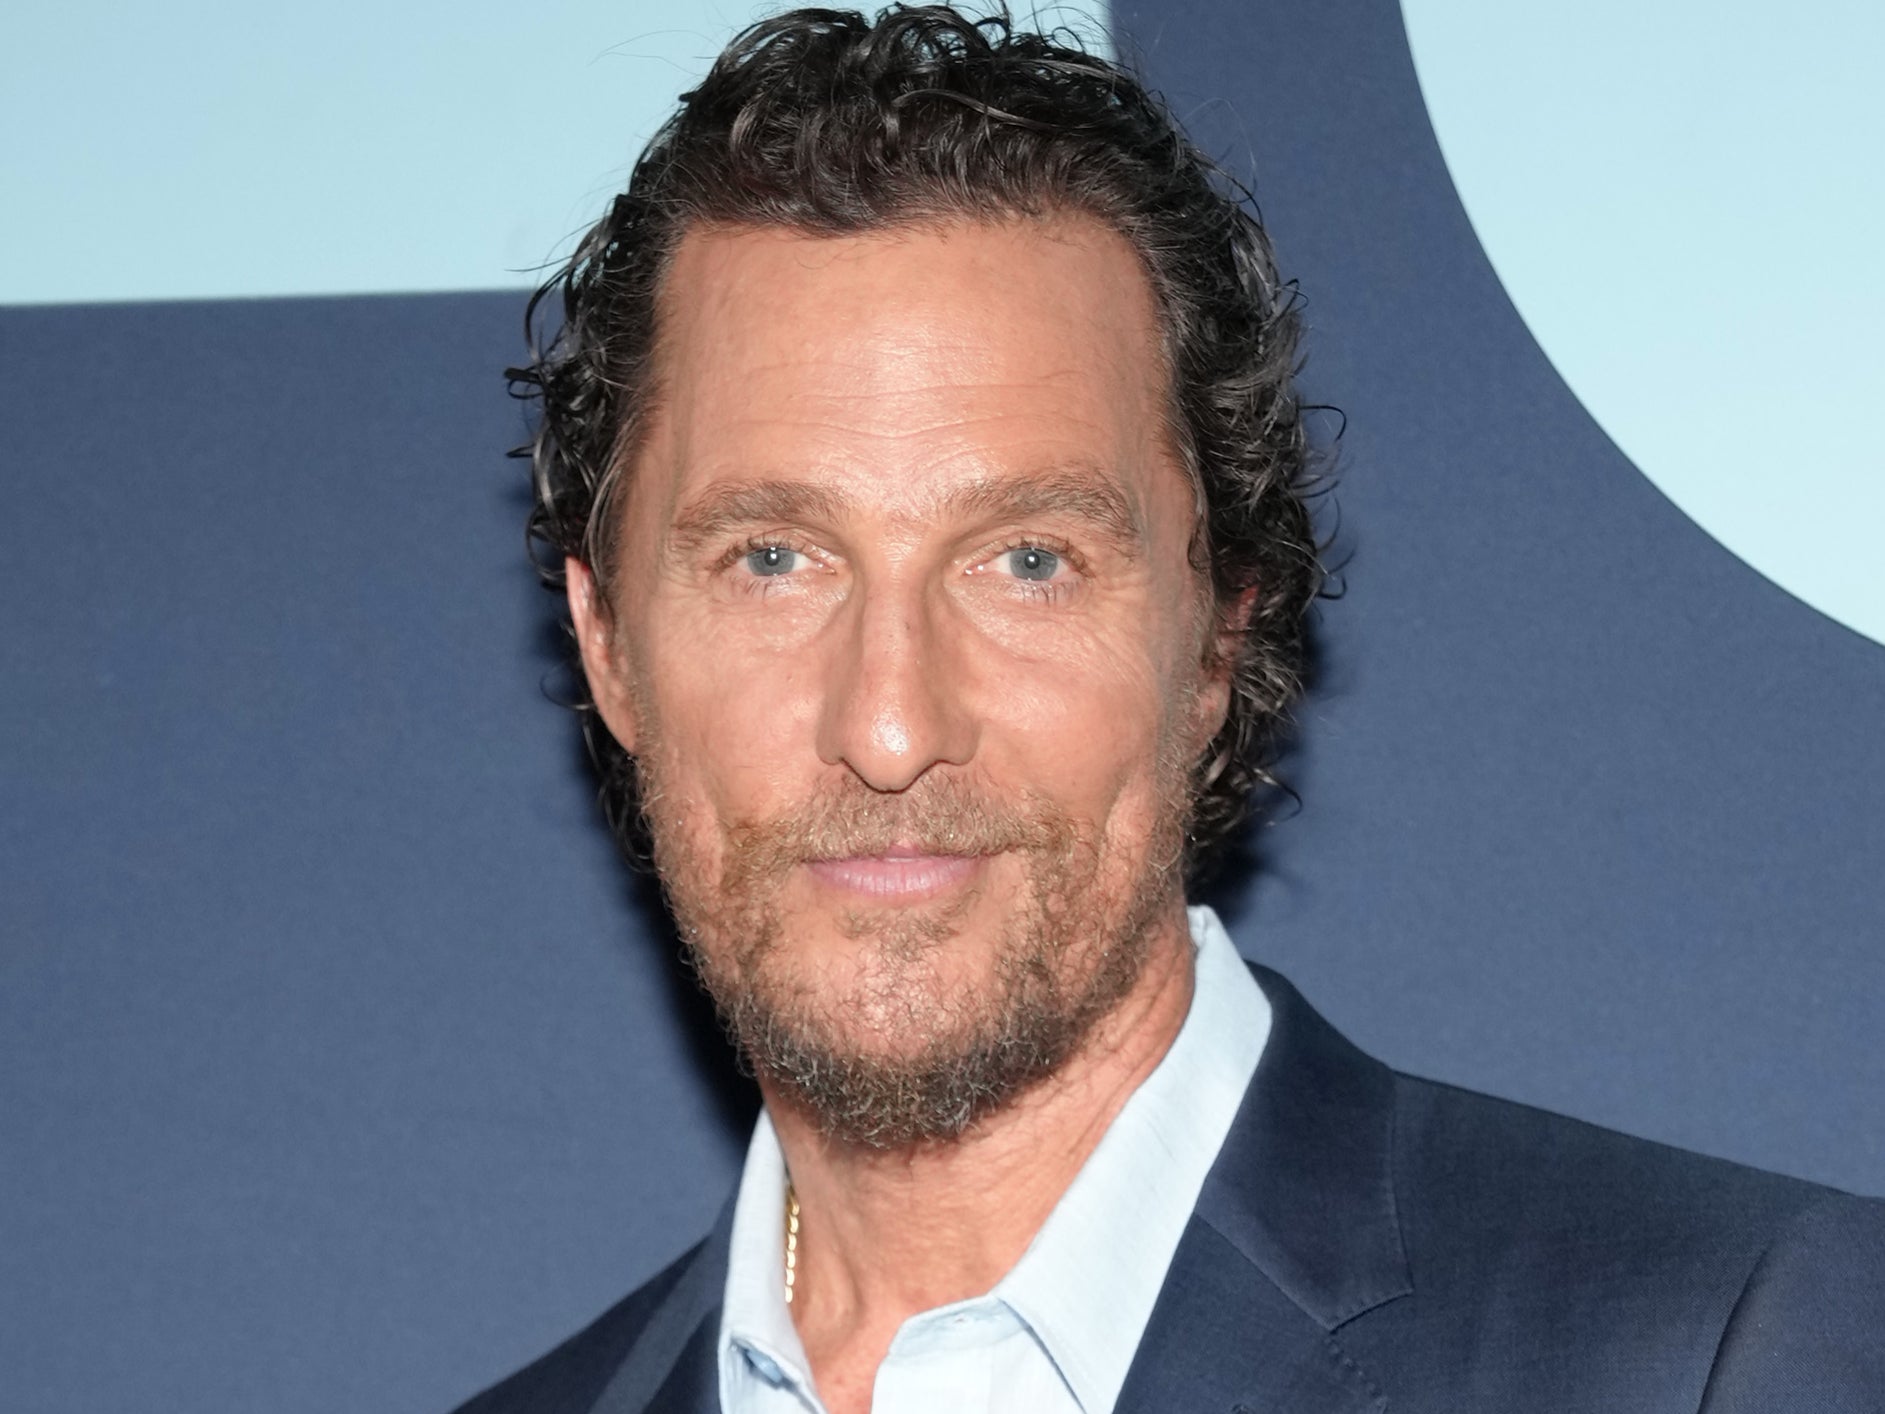 Matthew McConaughey successfully turned his career around in the 2010s